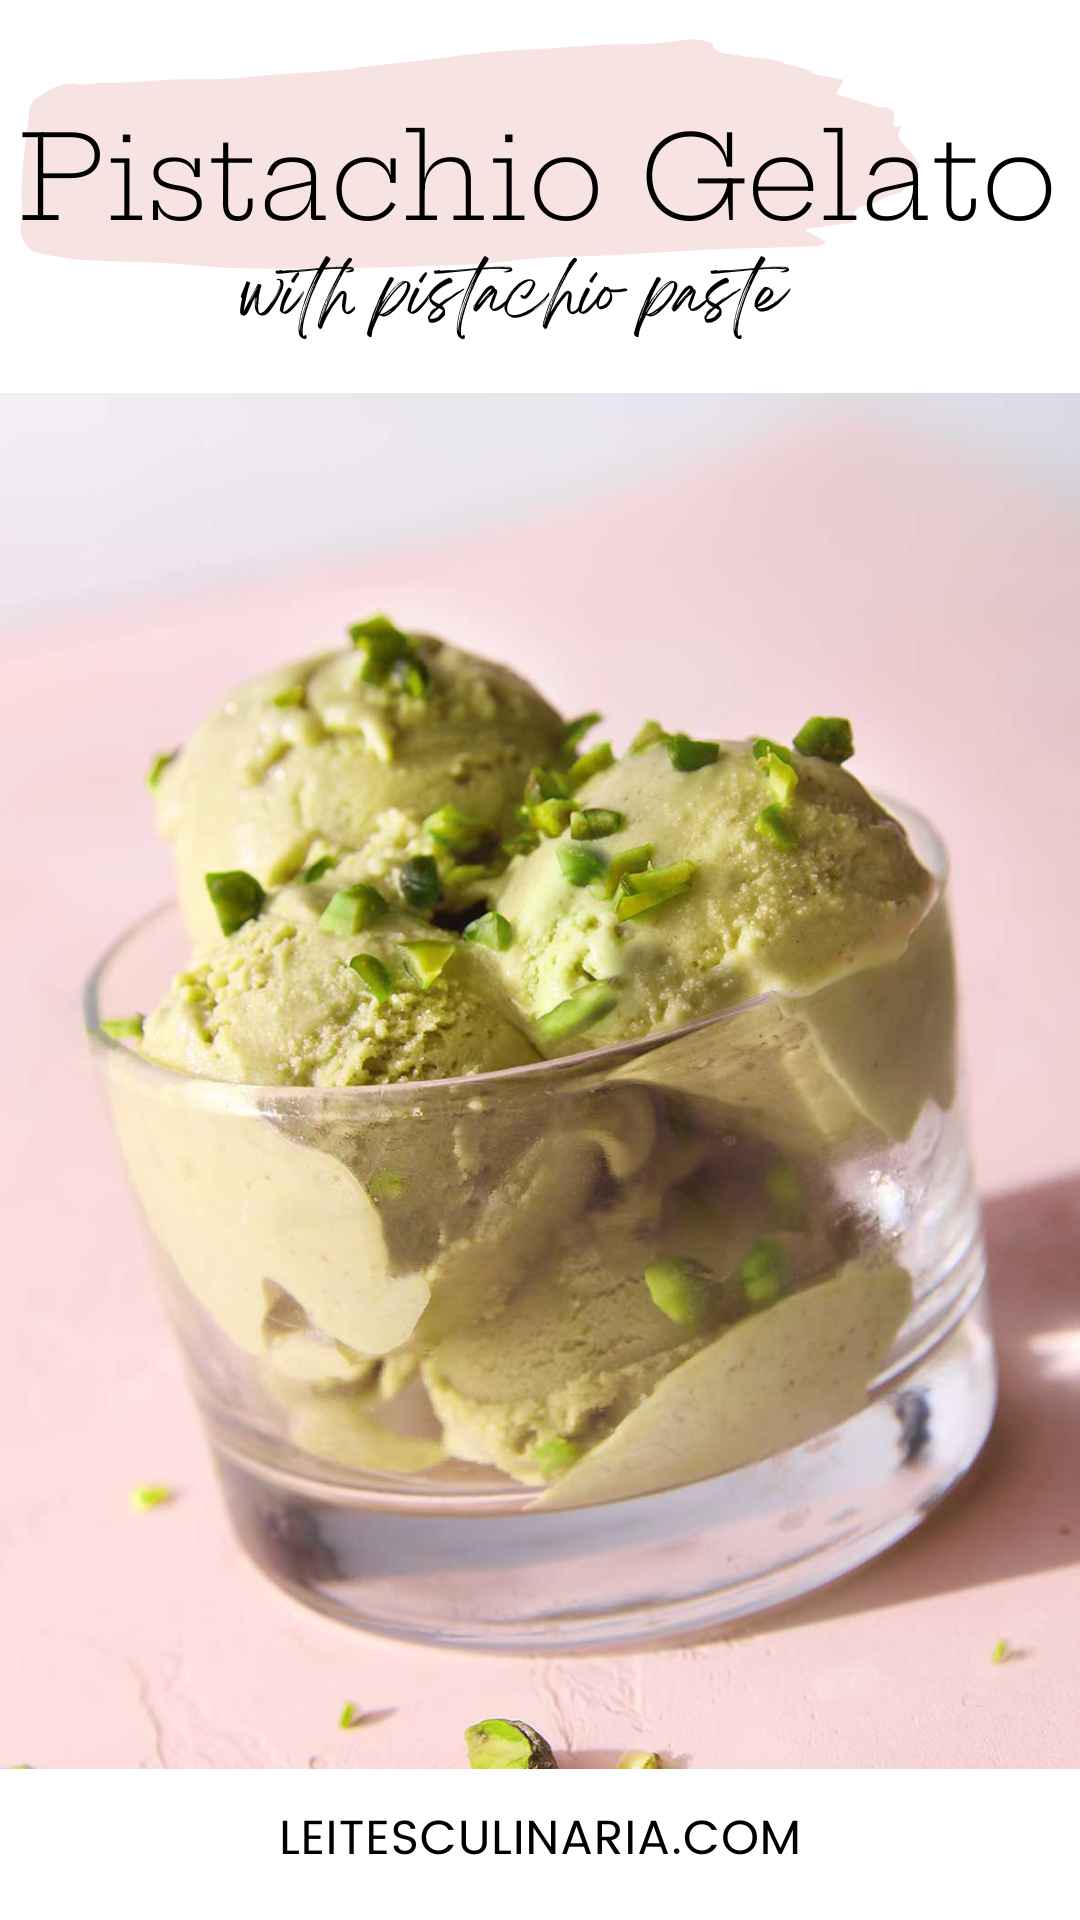 A bowl containing four scoops of pistachio gelato with chopped pistachios on top.